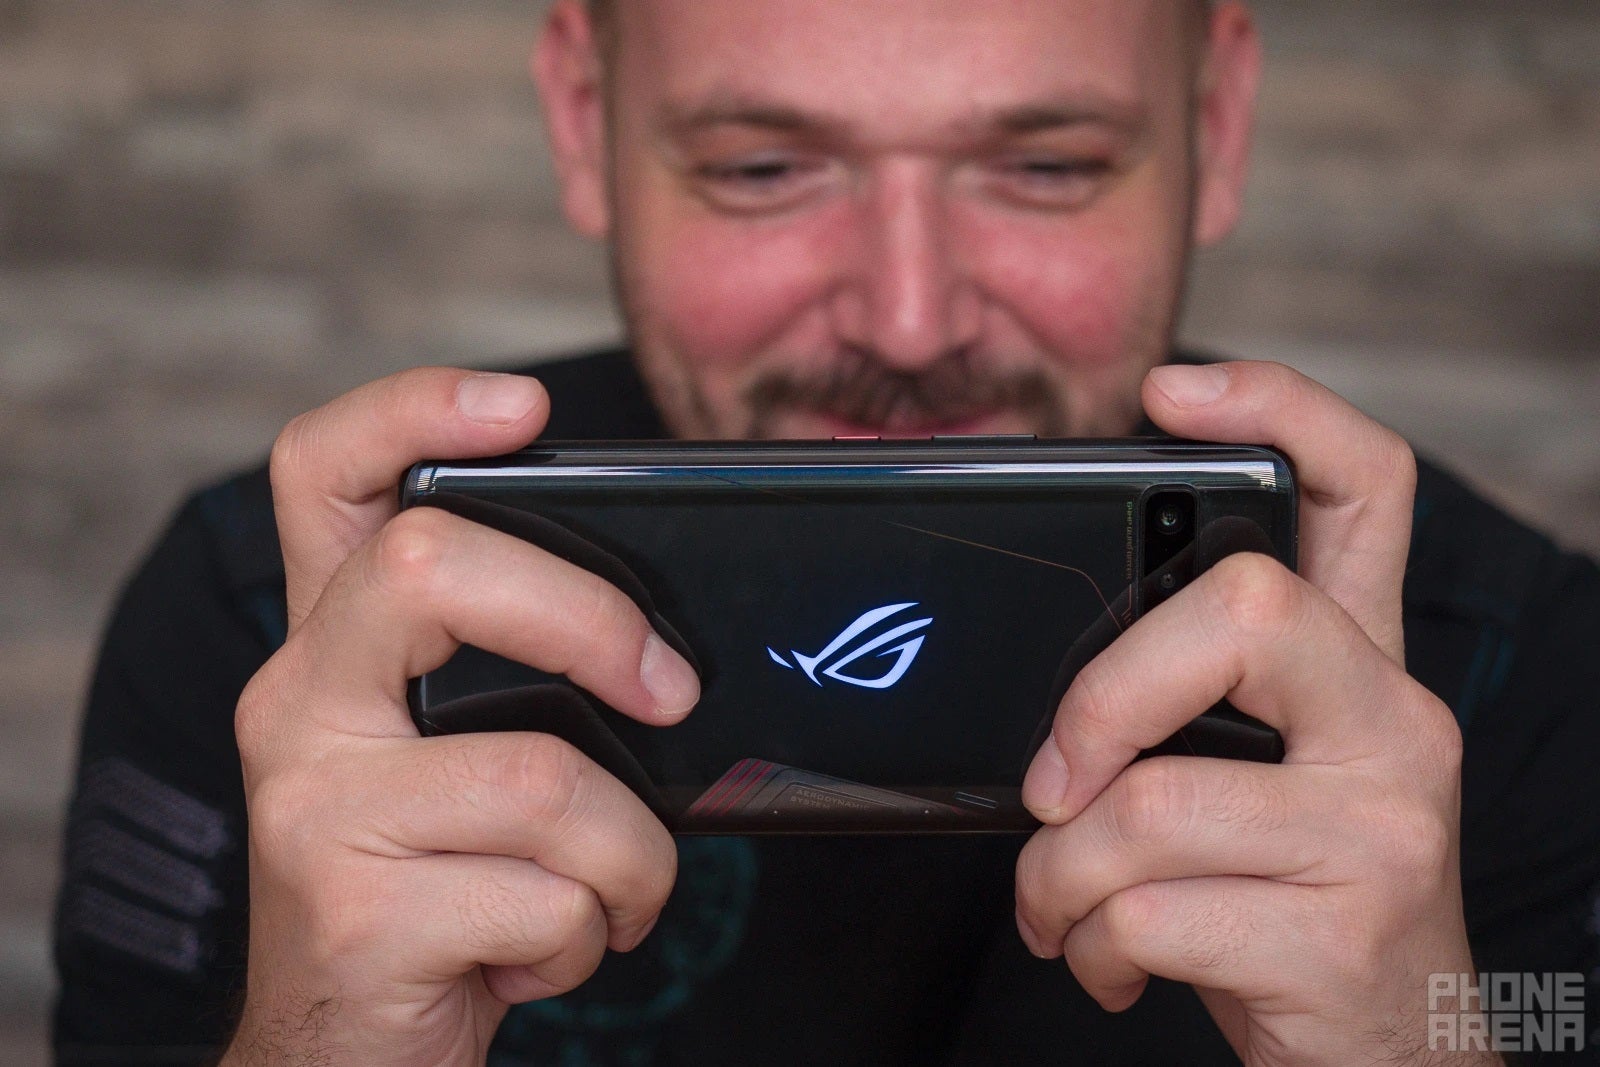 Just look at his happy face!  - Vote Now: Would you buy a gaming phone as your daily driver?